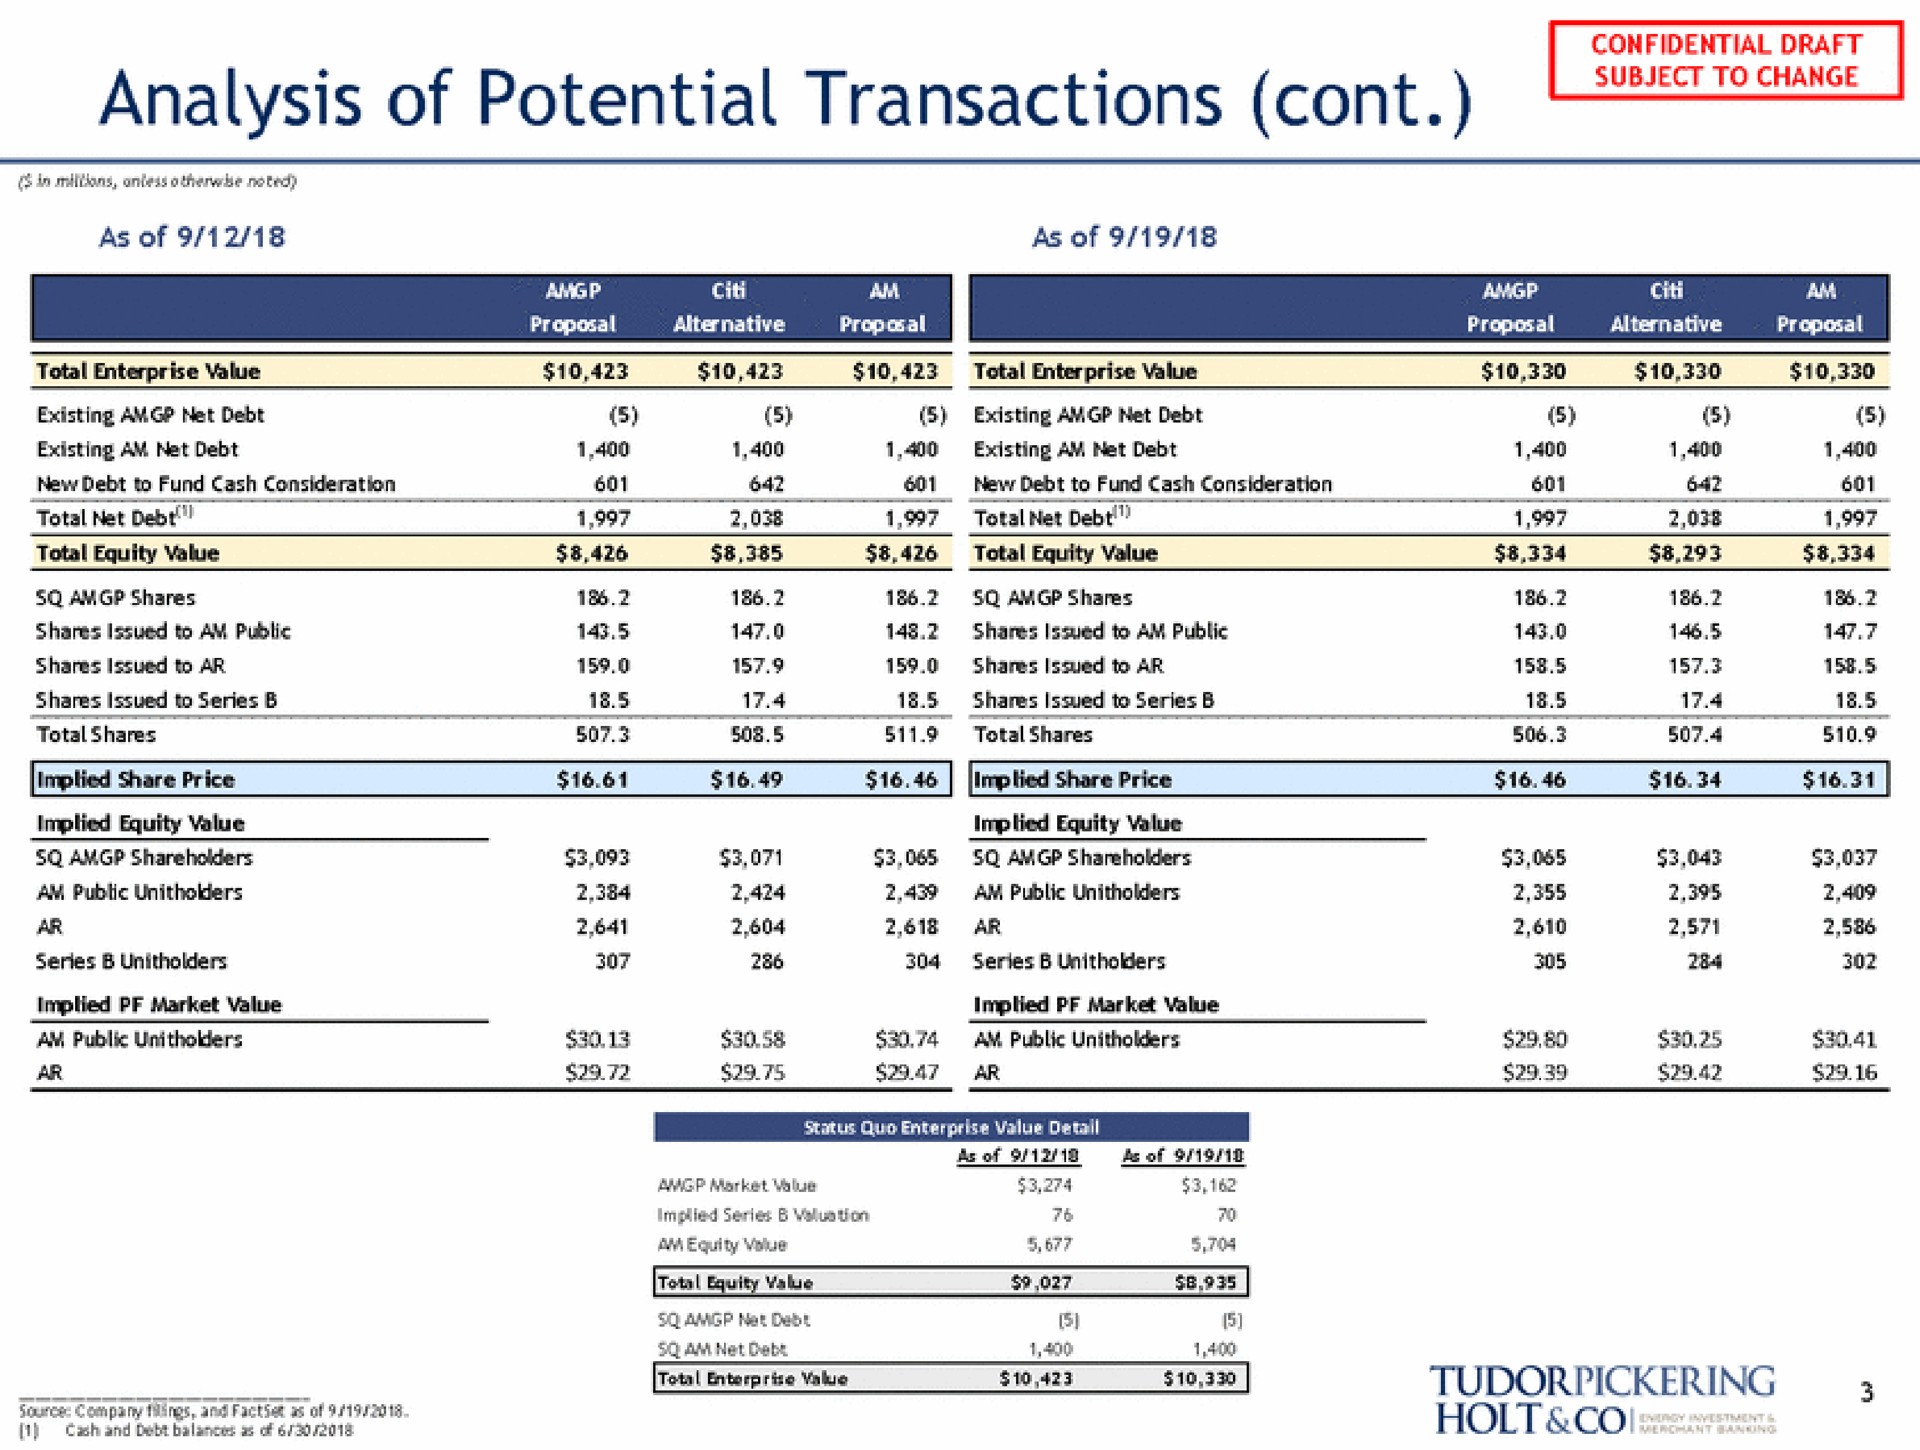 analysis of potential transactions holt | Tudor, Pickering, Holt & Co